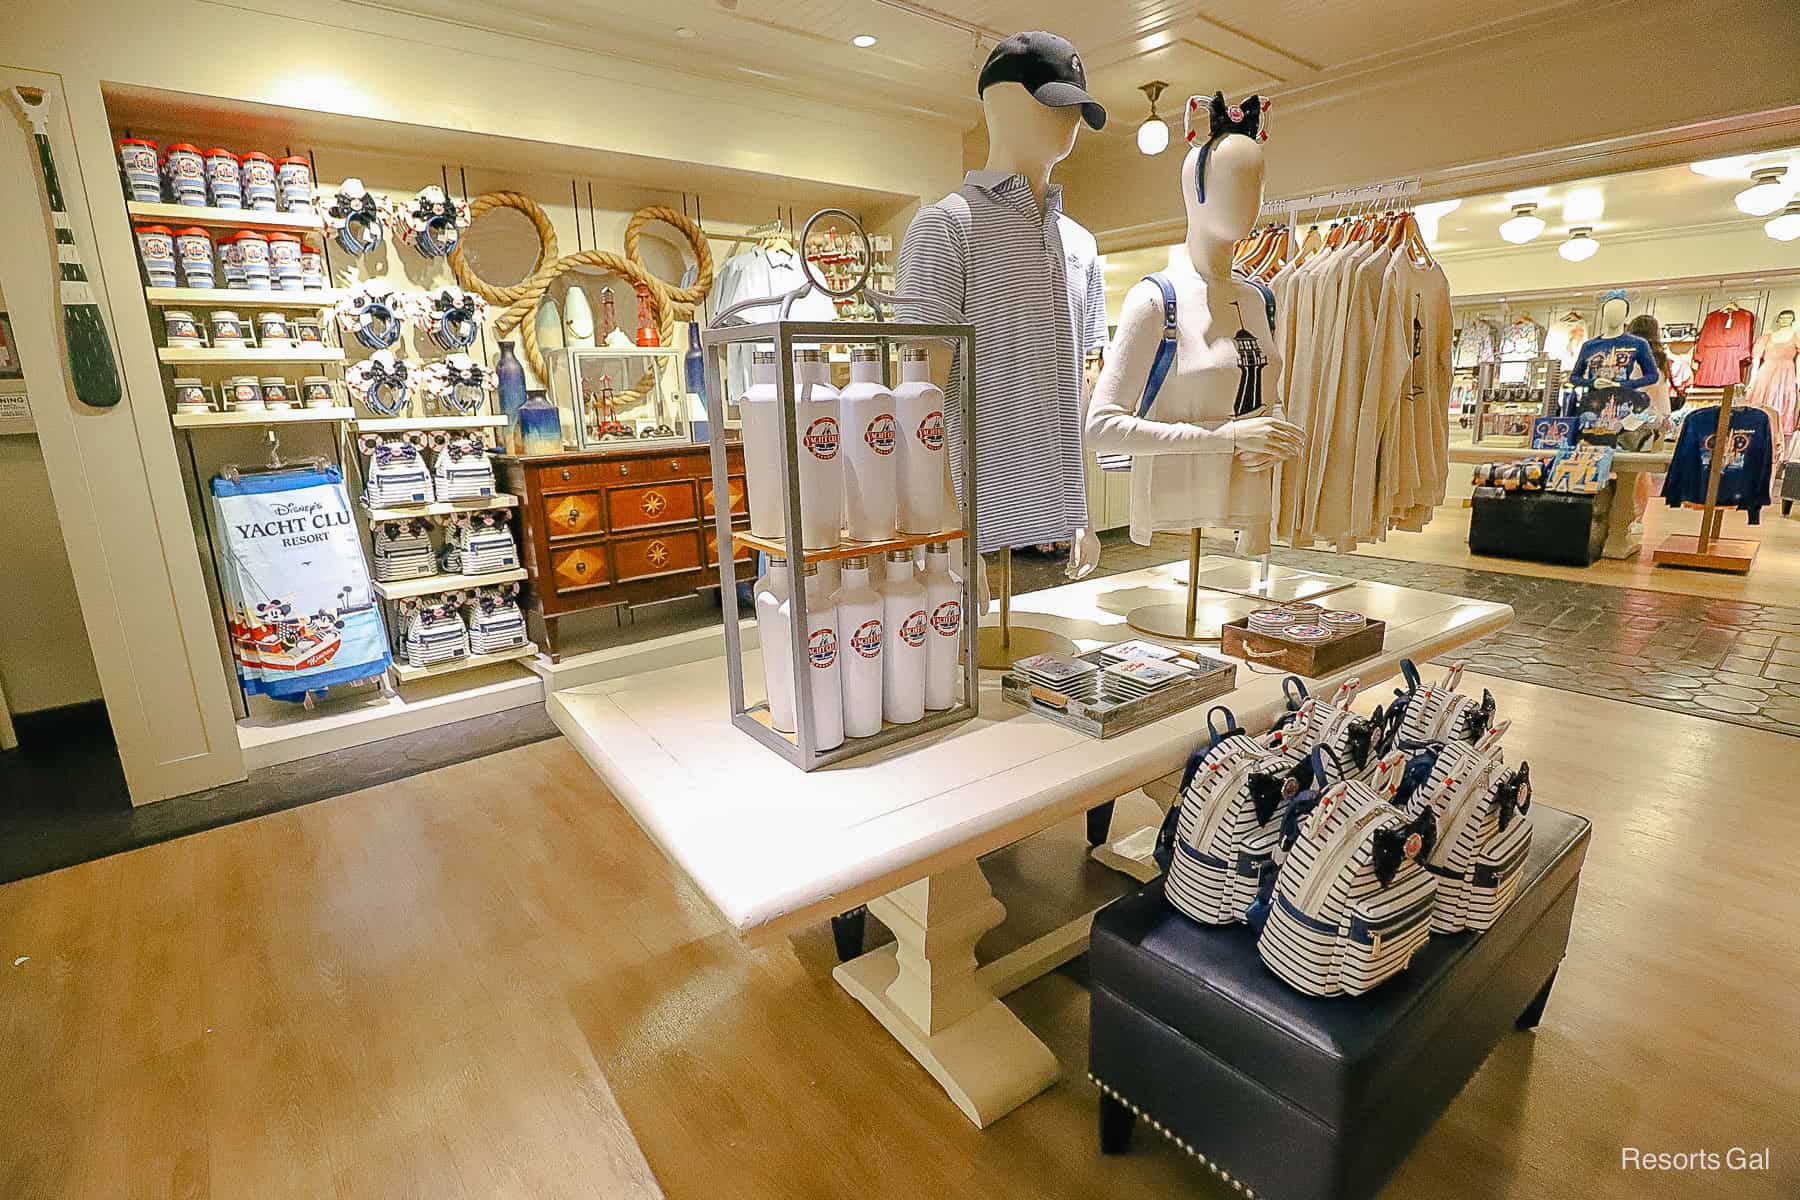 New Resort Branded Merchandise at Disney’s Yacht Club (Minnie Ears & Loungefly)